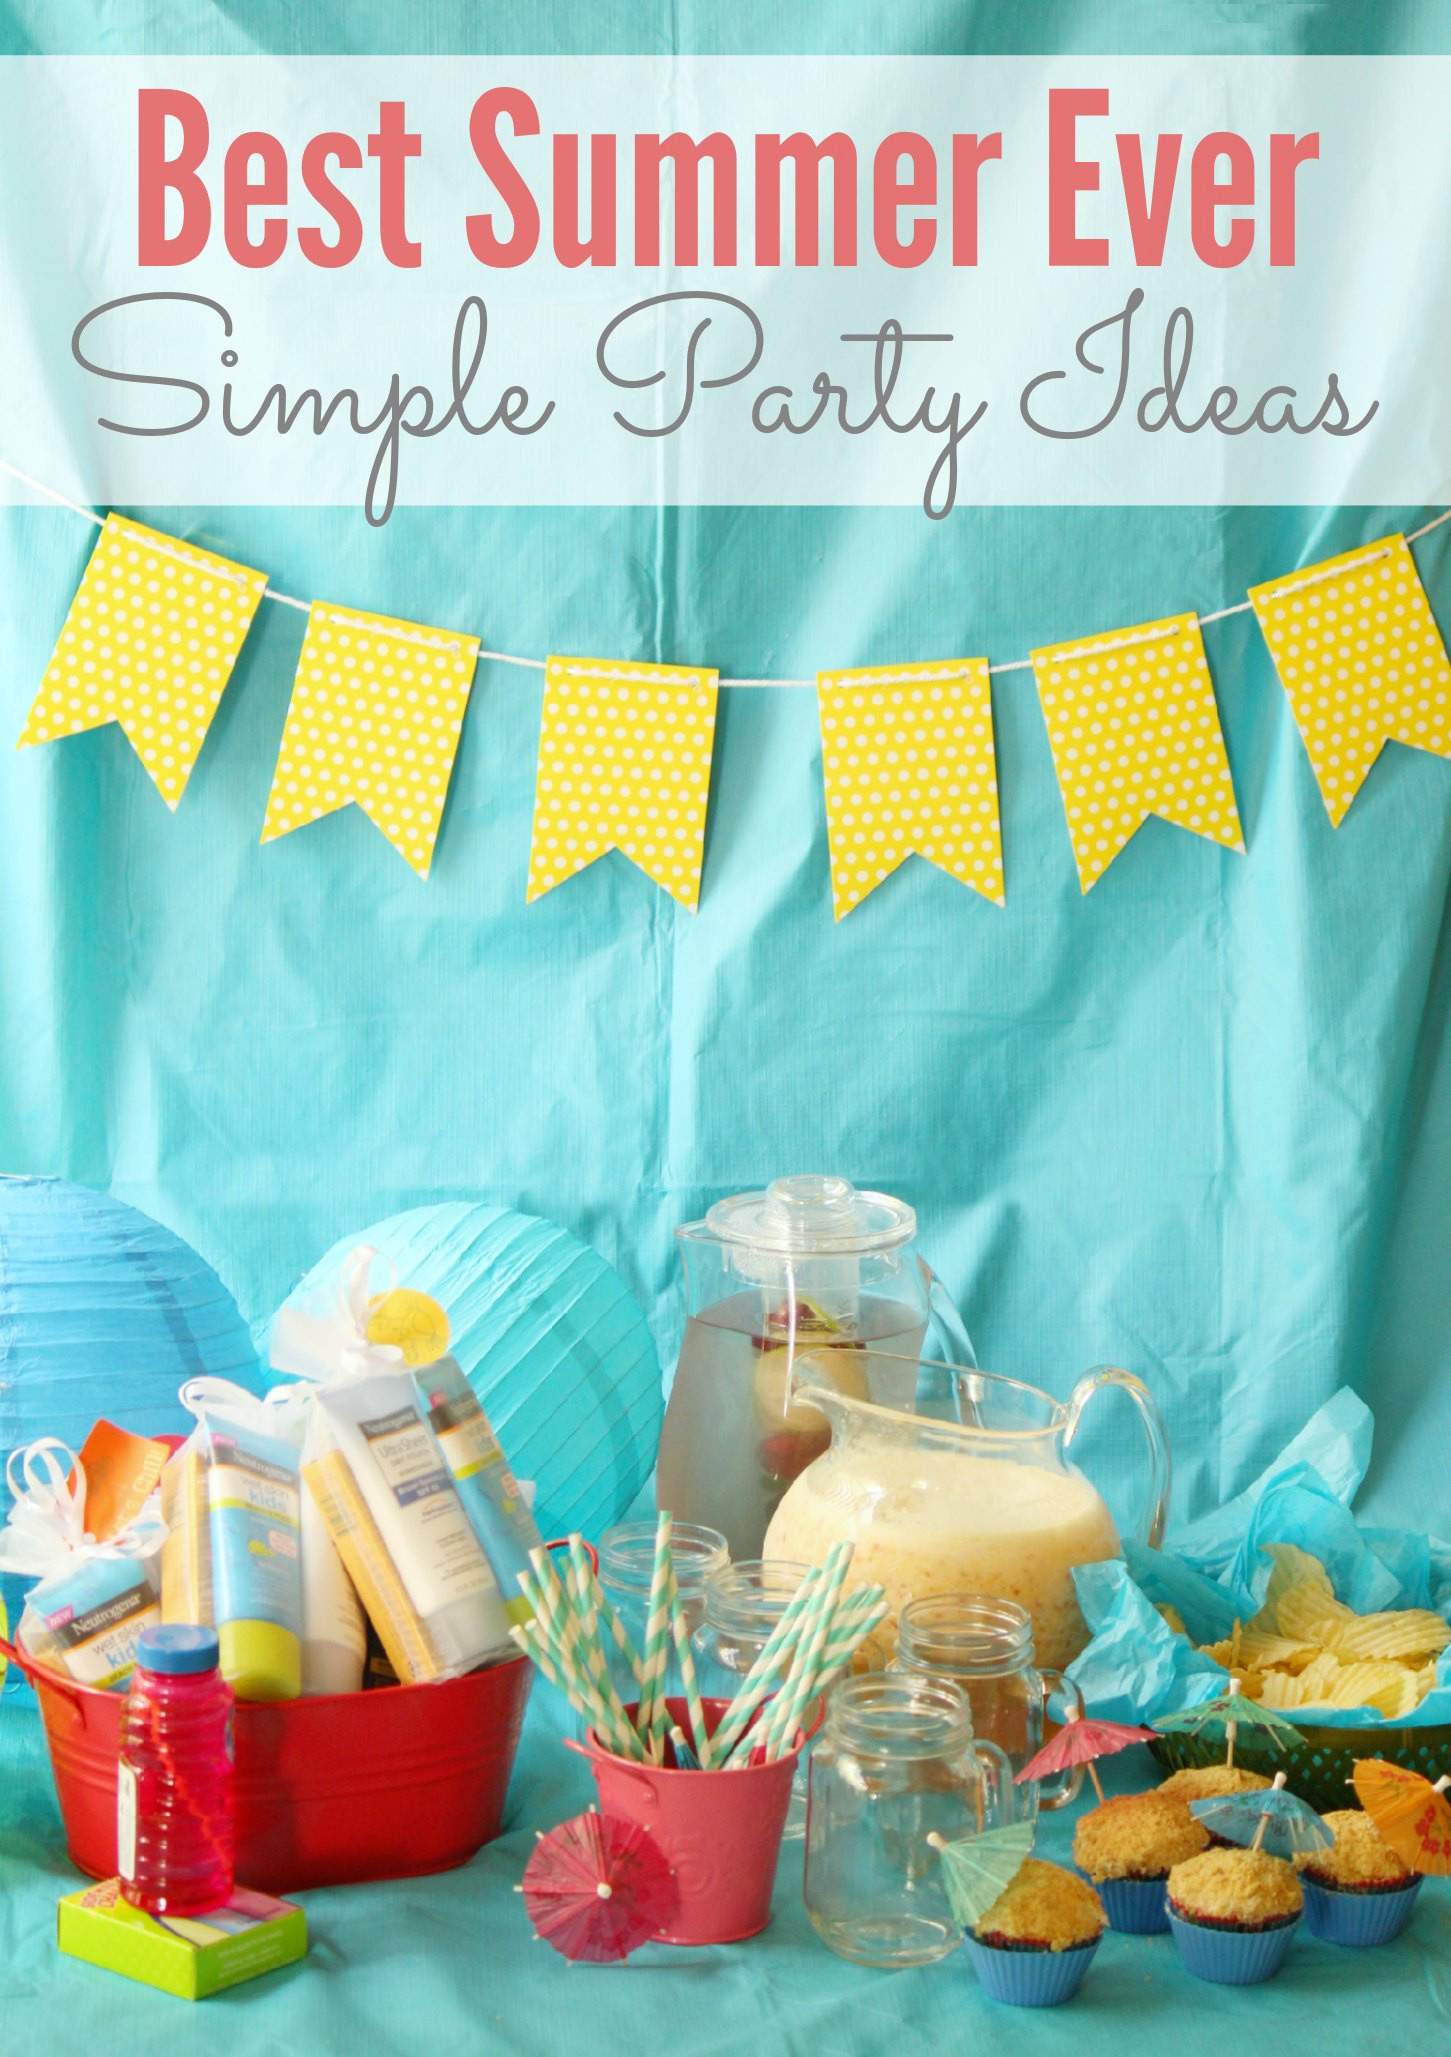 Best Summer Party Ideas
 Simple “Best Summer Ever” Party Ideas